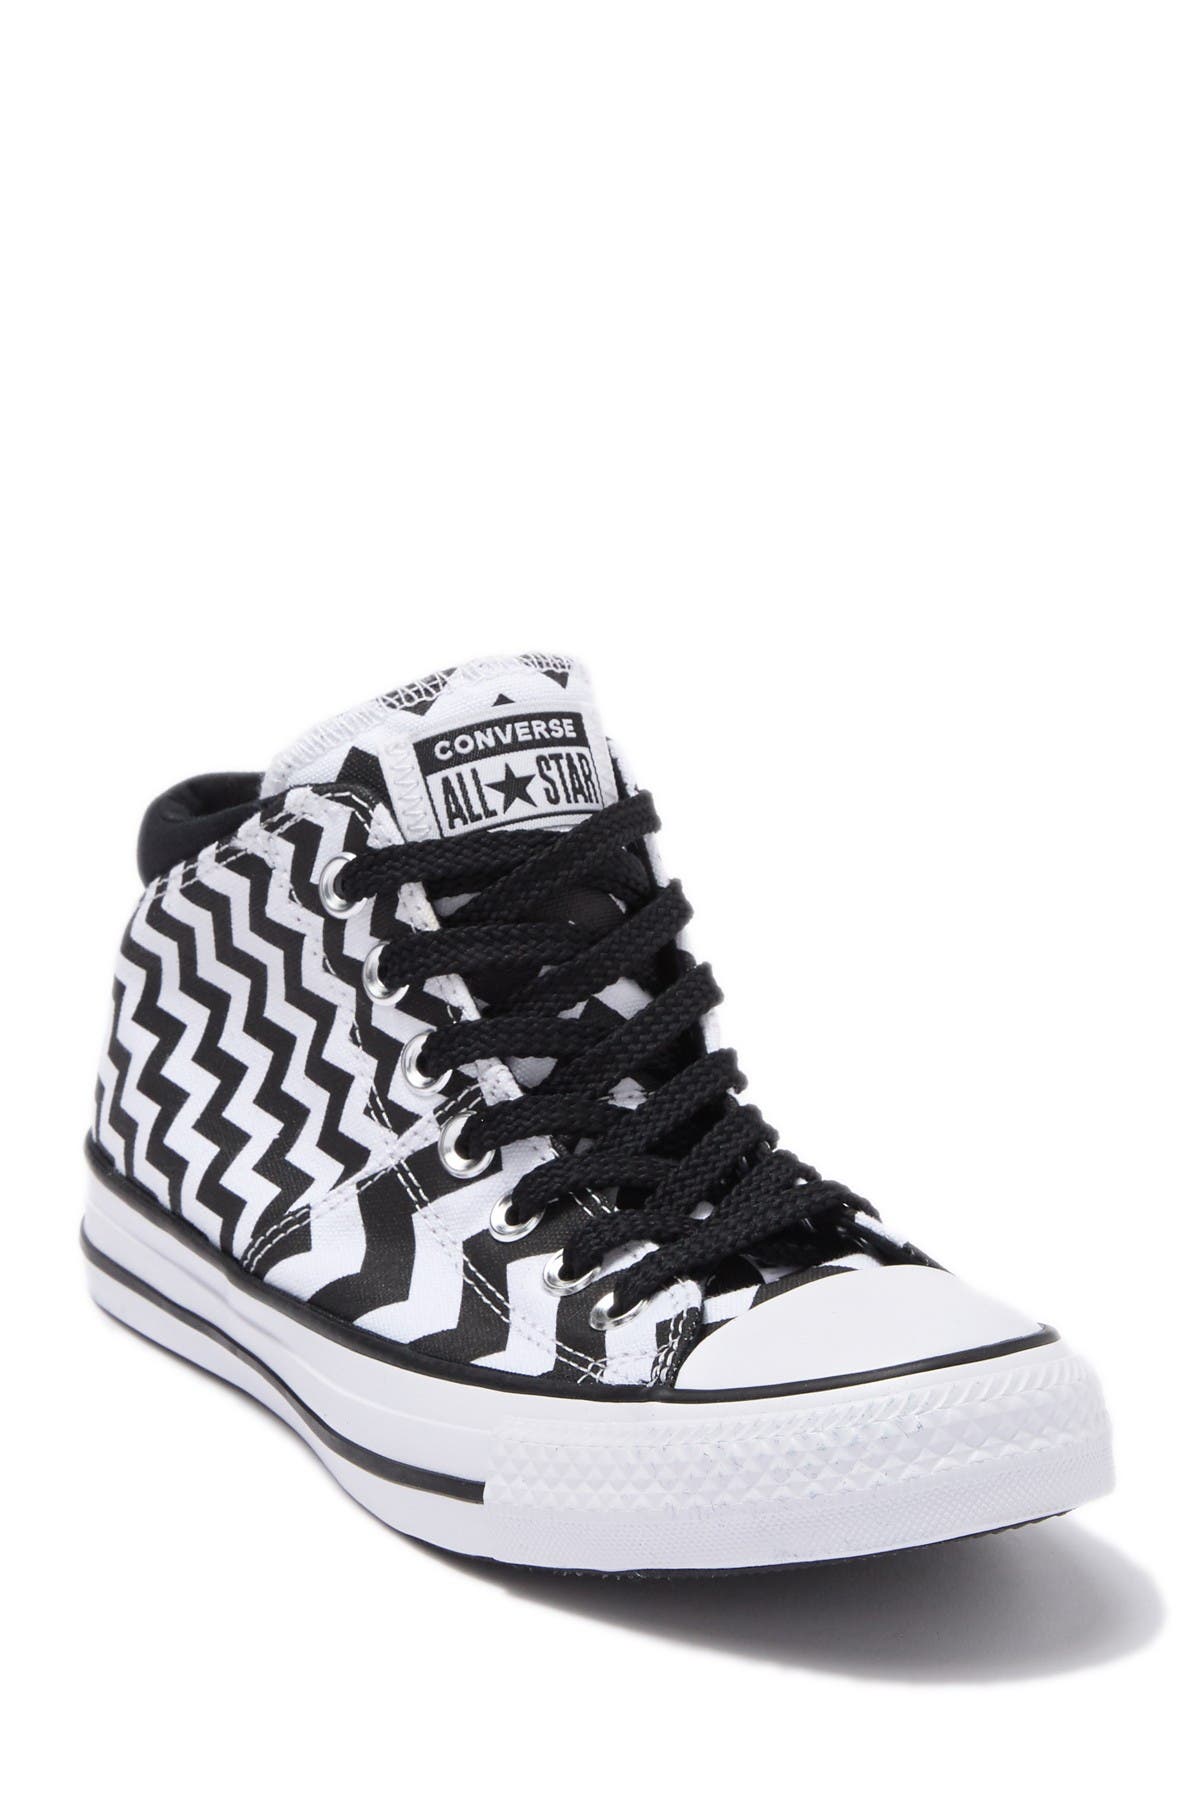 women's converse chuck taylor all star madison mid sneakers